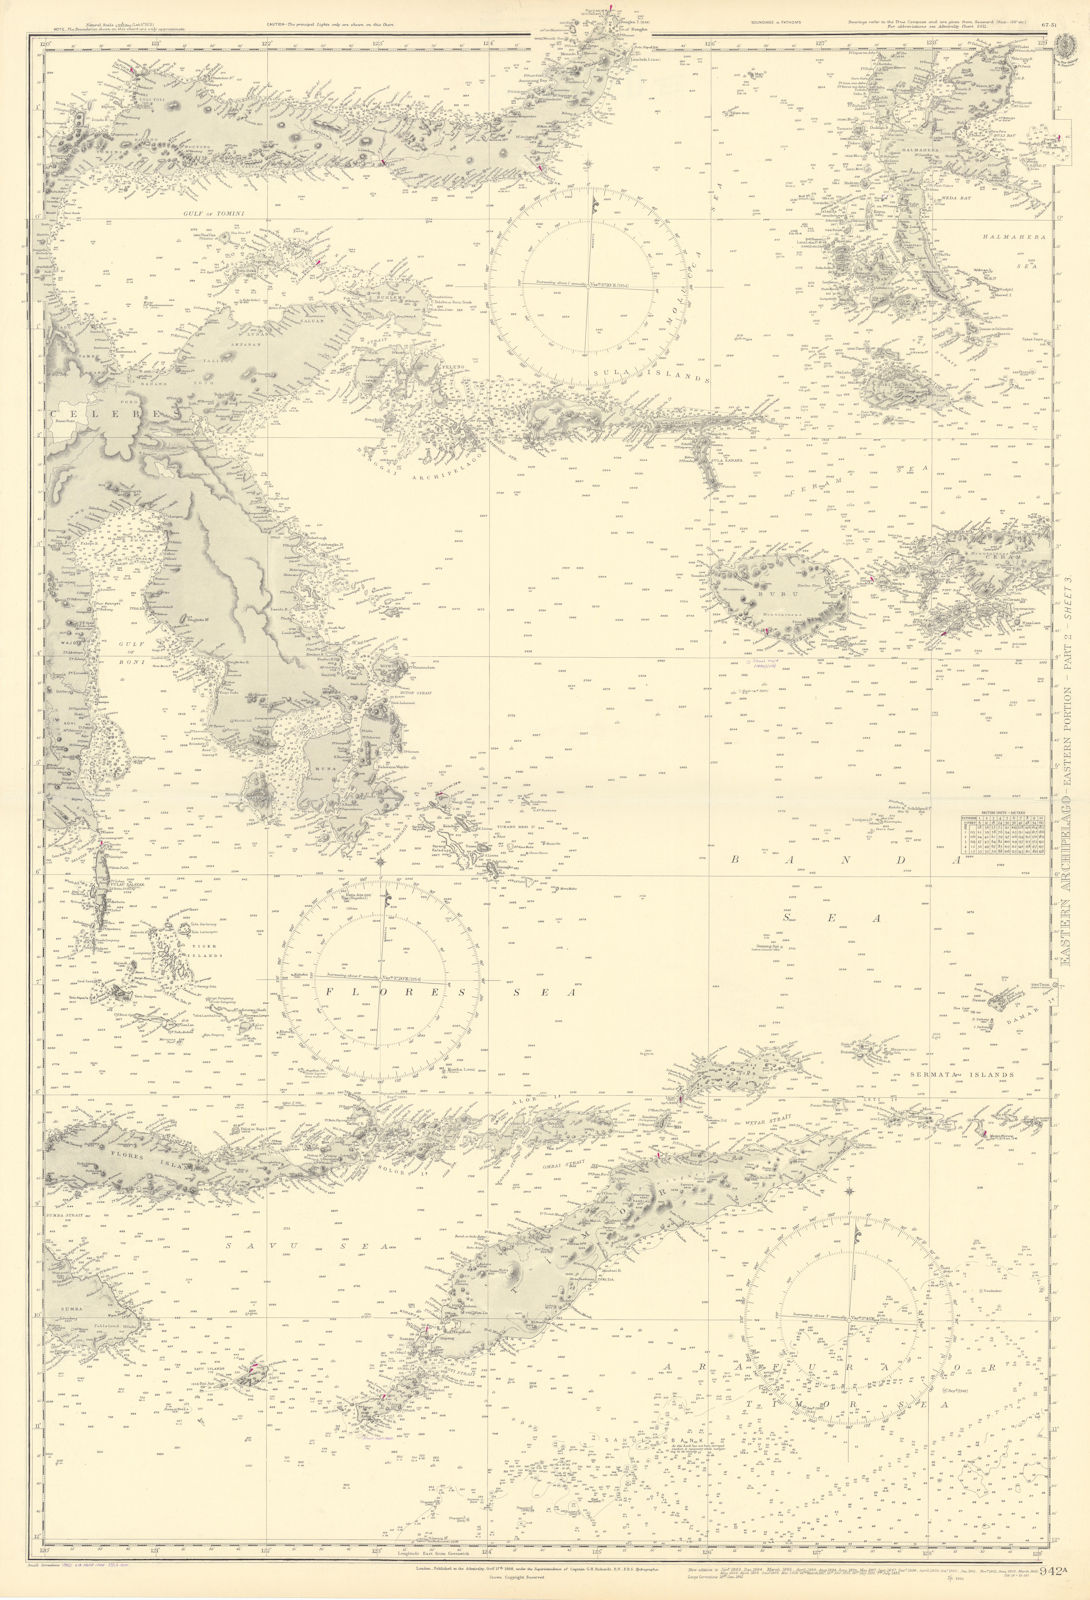 Eastern Indonesia. Timor Sulawesi Moluccas. ADMIRALTY sea chart 1868 (1954) map